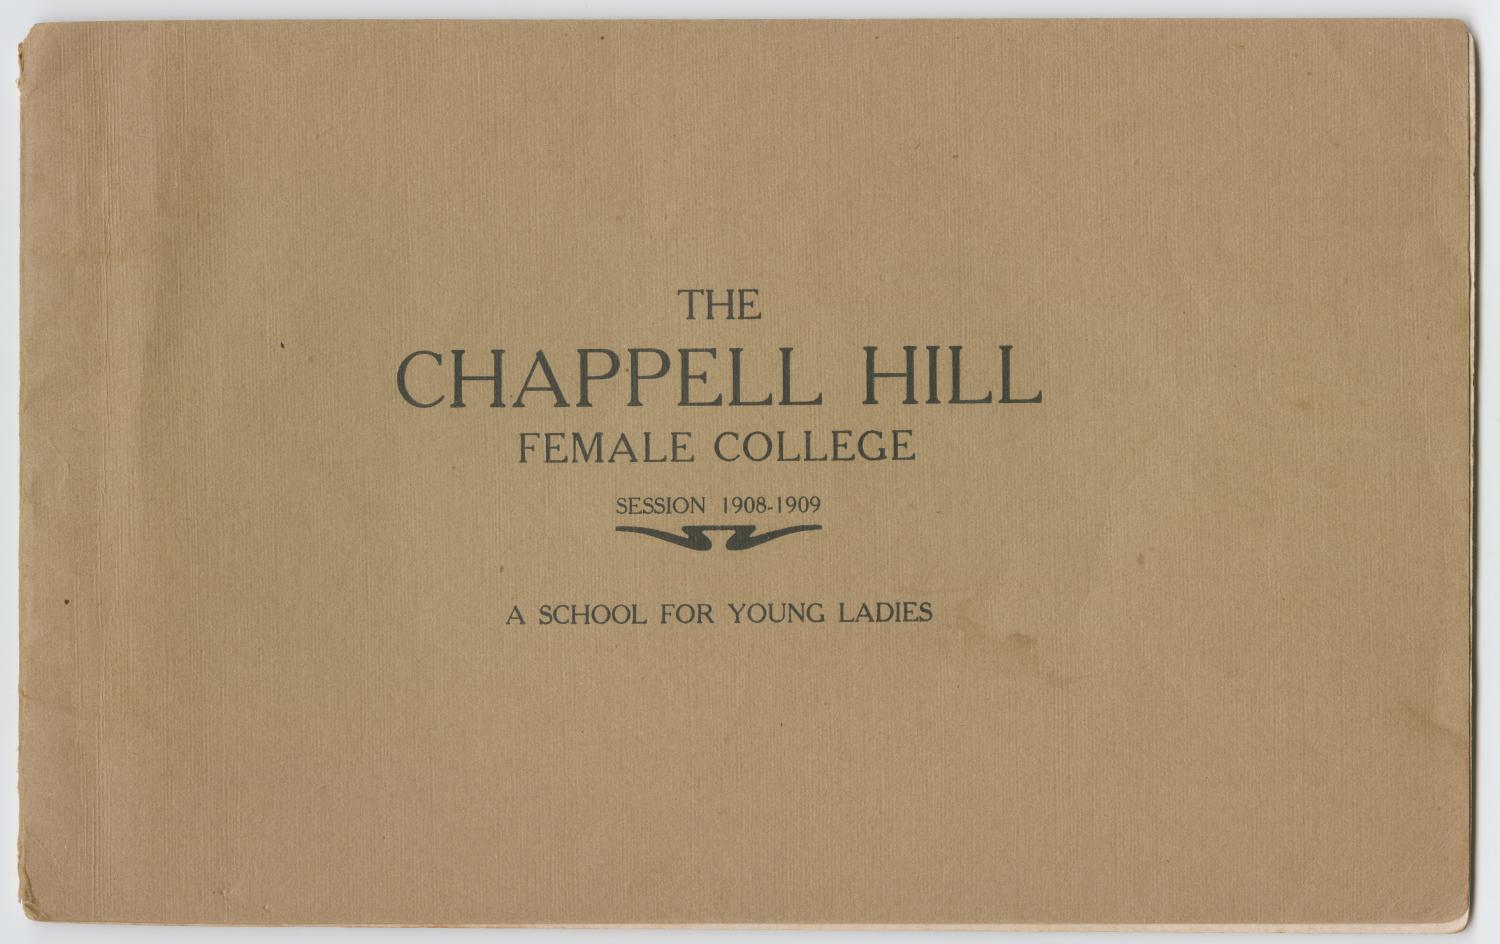 Catalog of Chappell Hill Female College, 1908
                                                
                                                    Front Cover
                                                